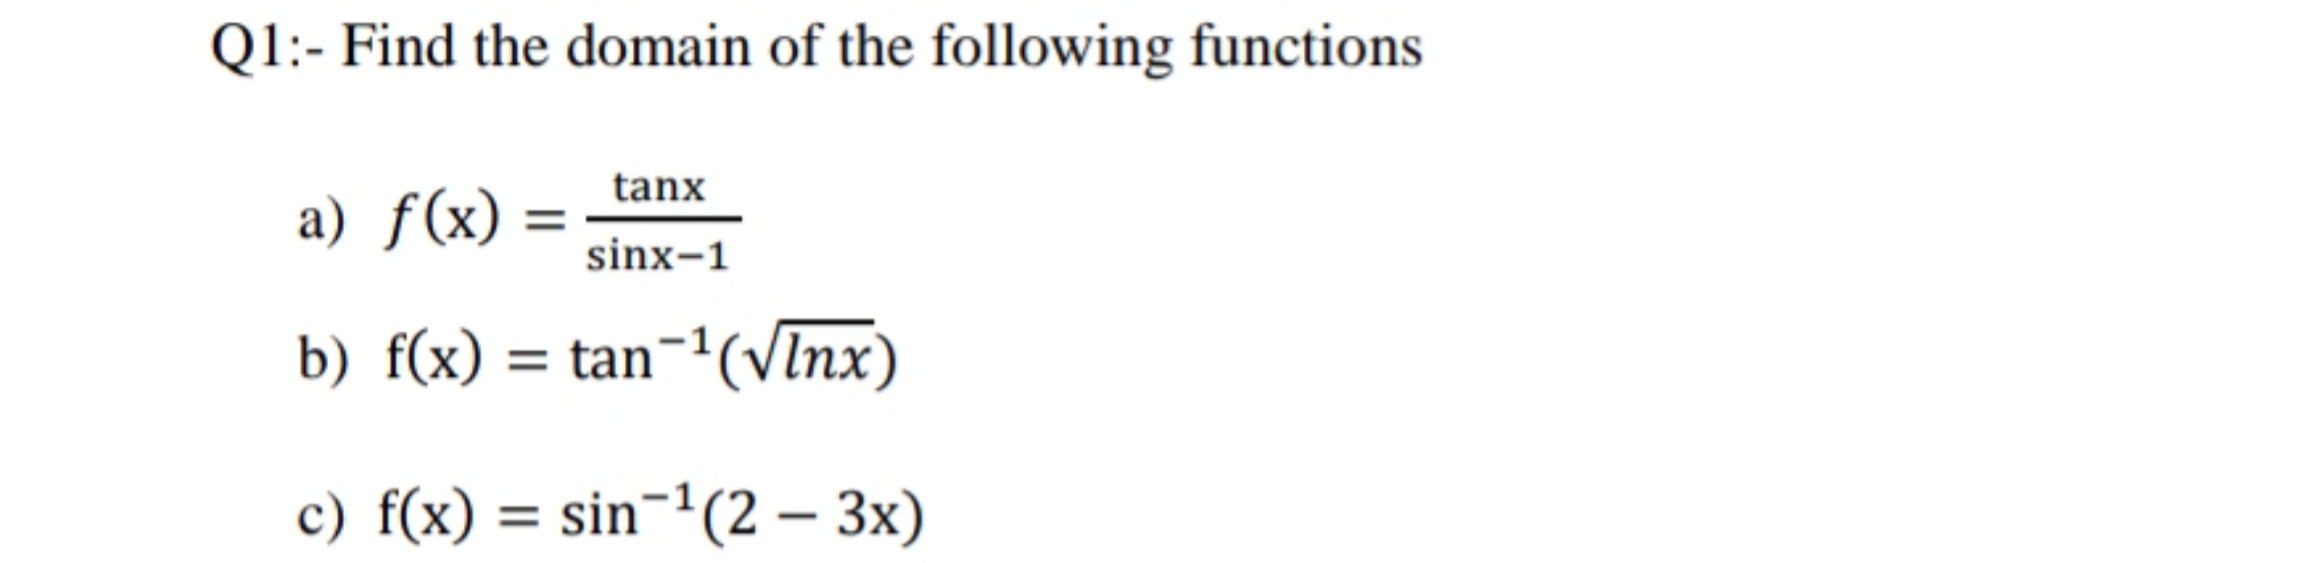 Q1:- Find the domain of the following functions
tanx
a) f(x)
sinx-1
b) f(x) tan-(vInx)
c) f(x) sin-(2 3x)
